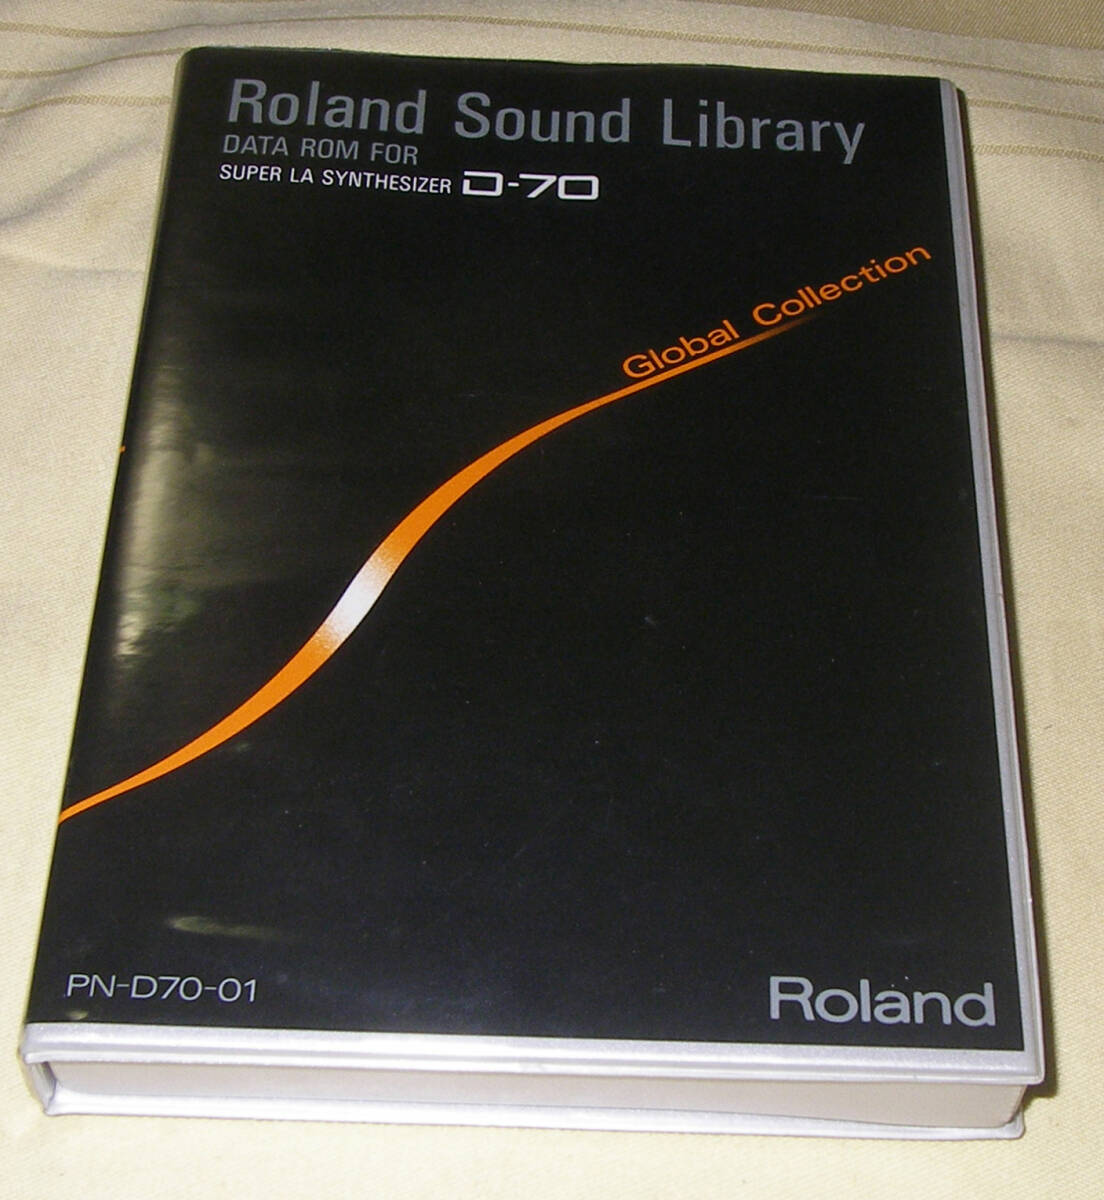 *ROLAND PN-D70-01 GLOBAL Collection DATA ROM FOR D-70*OK!!*MADE in JAPAN*